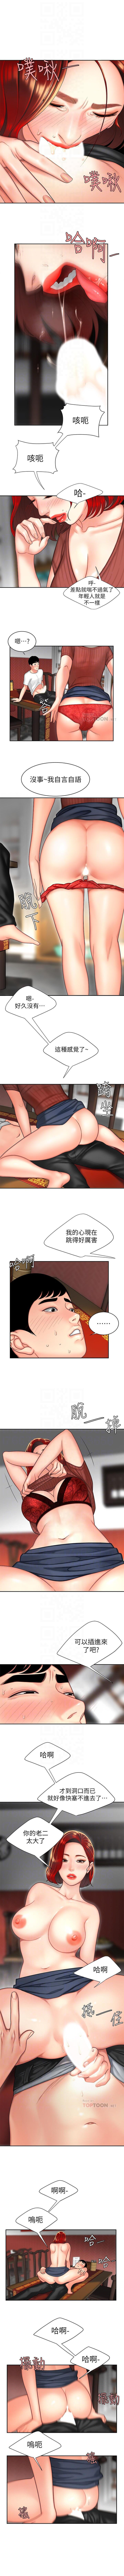 DELIVERY MAN | 幸福外卖员 Ch. 2 [Chinese] 